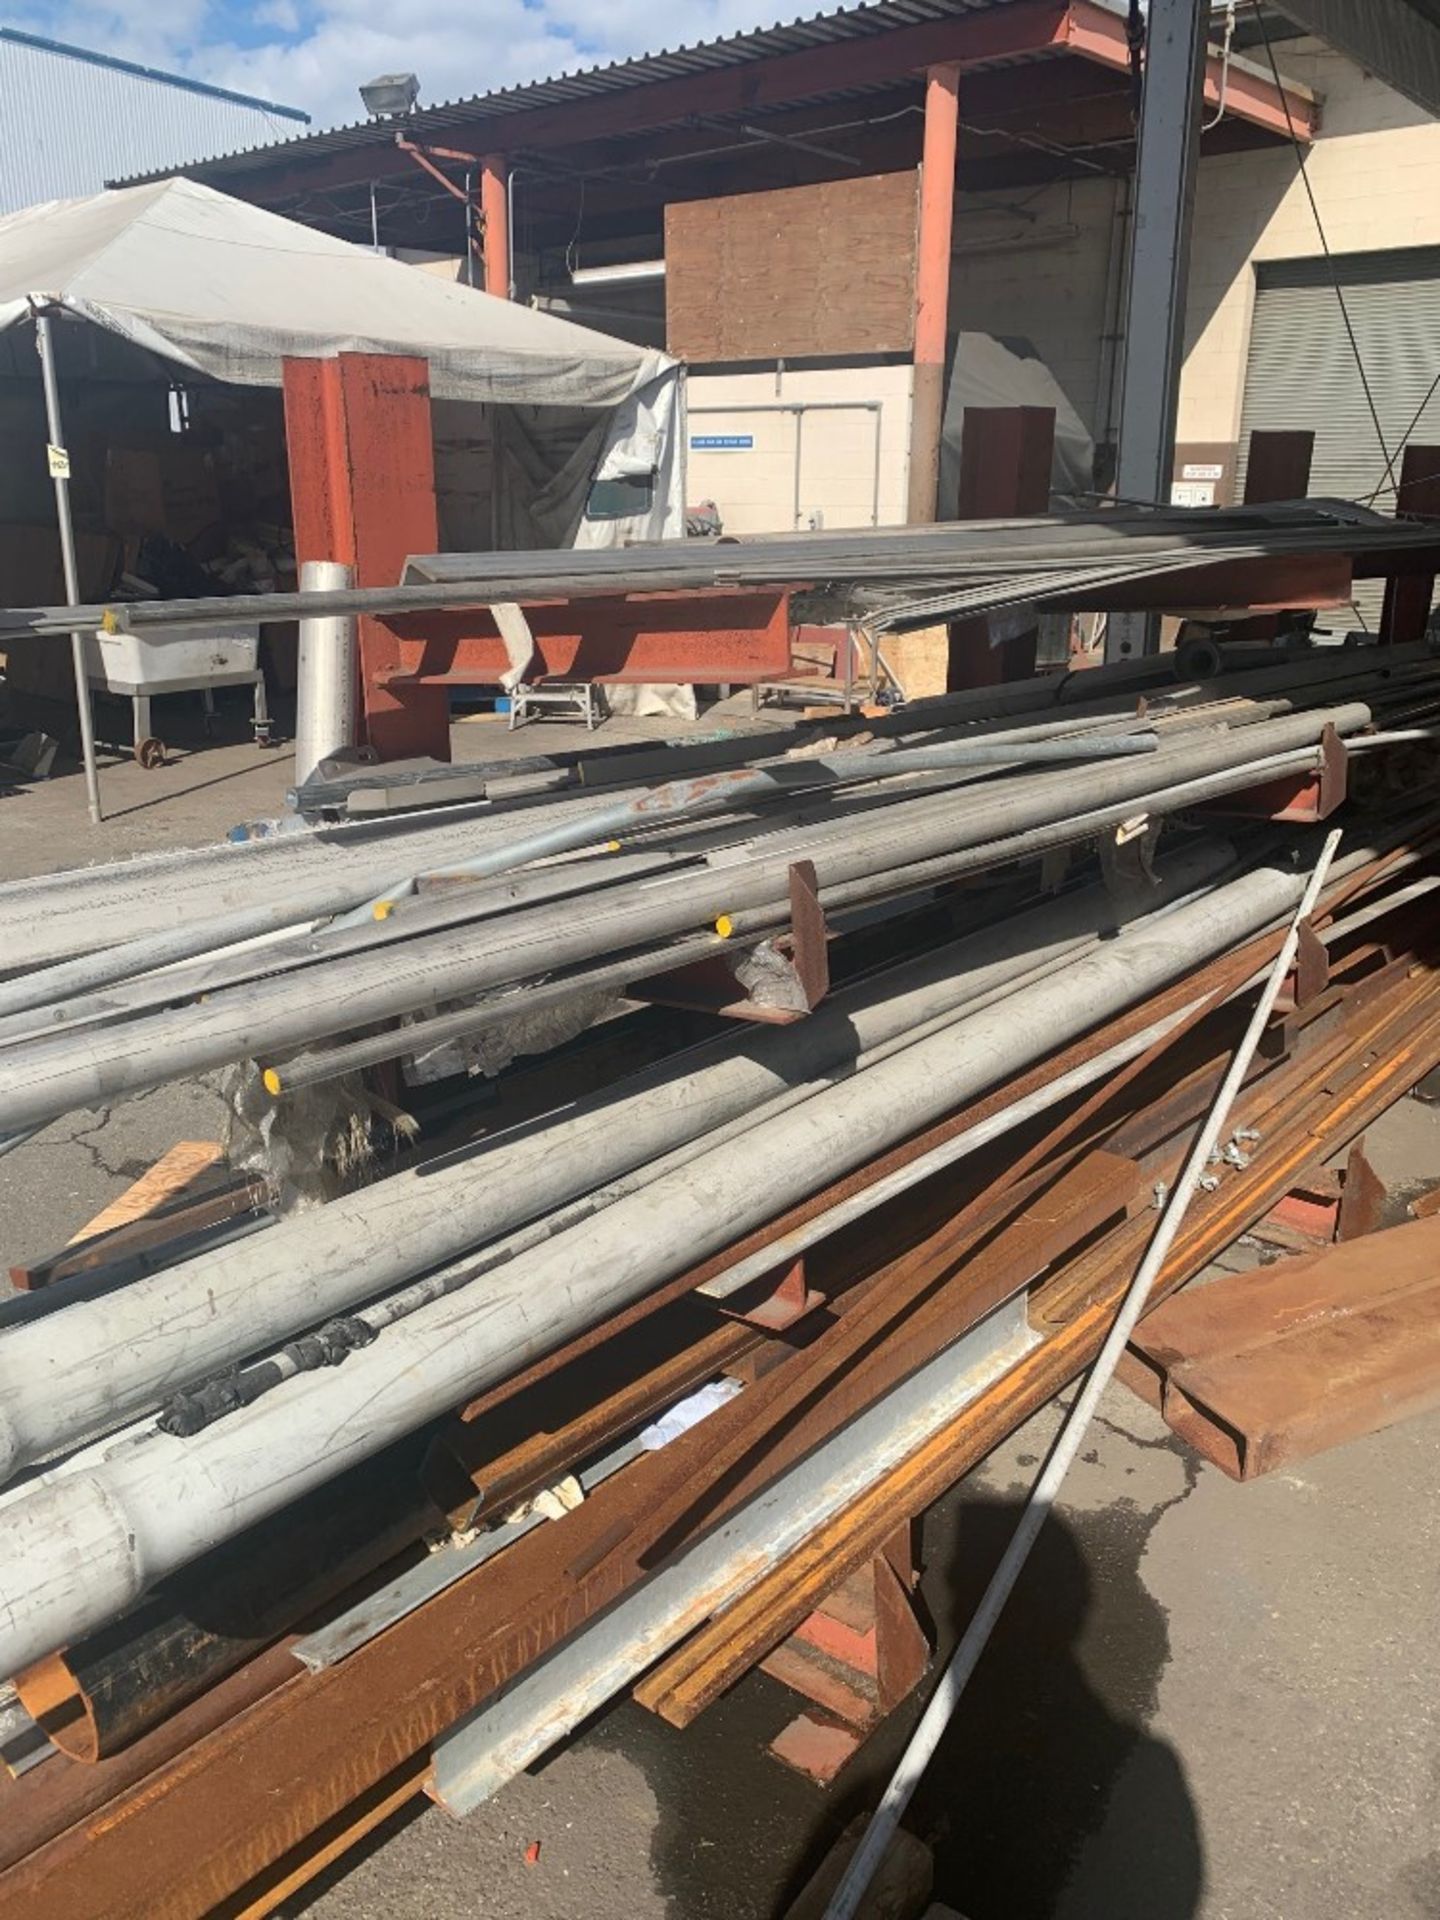 Lot (3) Pipe Racks and contents: Required Loading Fee $1500.00, Rigger-Norm Pavlish, Nebraska - Image 2 of 7